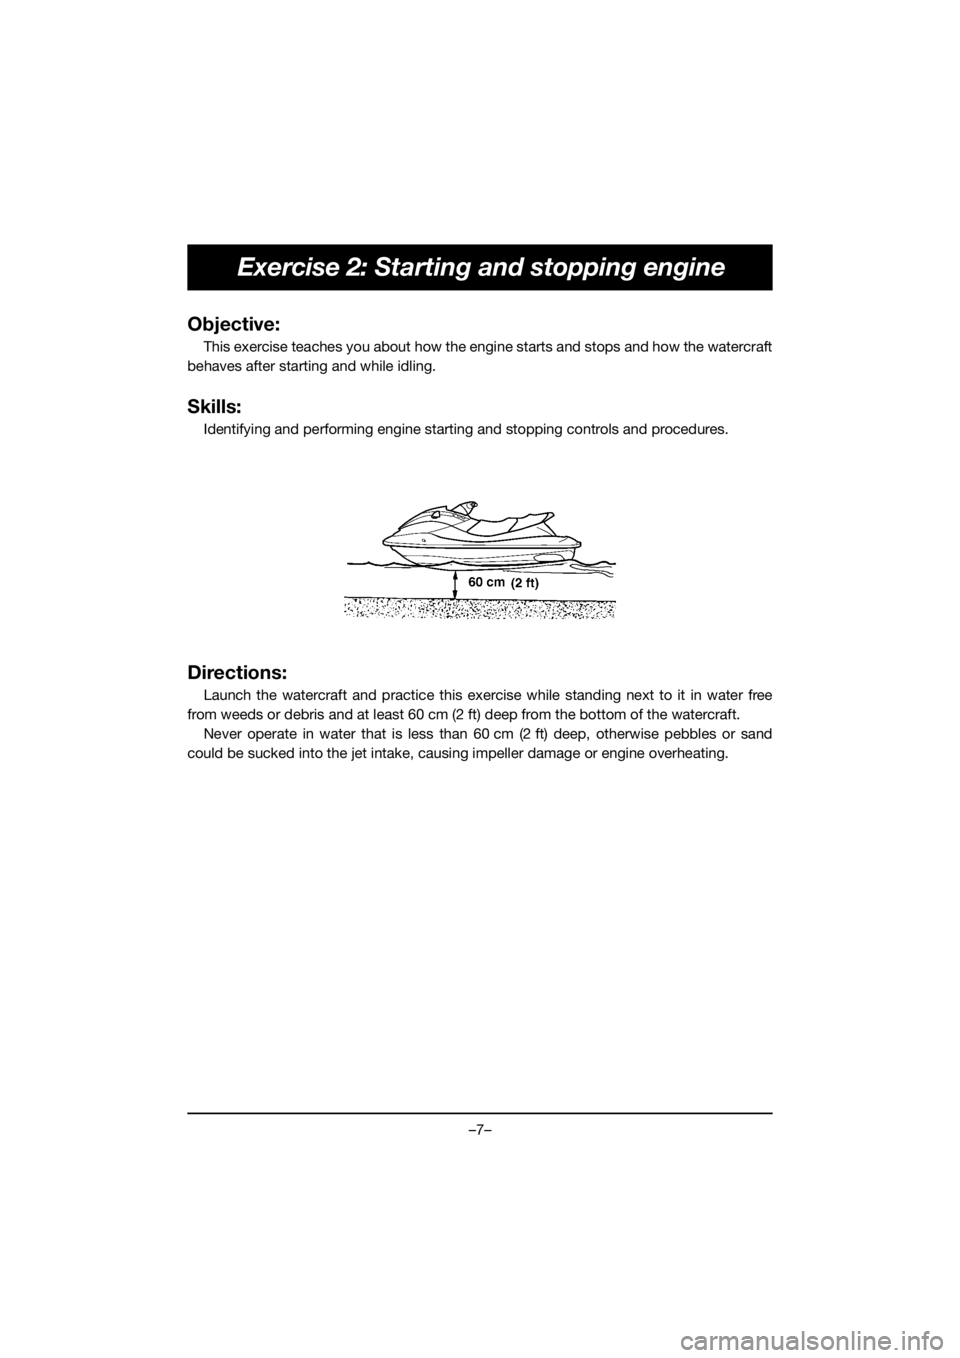 YAMAHA VX DELUXE 2021  Owners Manual –7–
Exercise 2: Starting and stopping engine
Objective:
This exercise teaches you about how the engine starts and stops and how the watercraft
behaves after starting and while idling.
Skills:
Iden